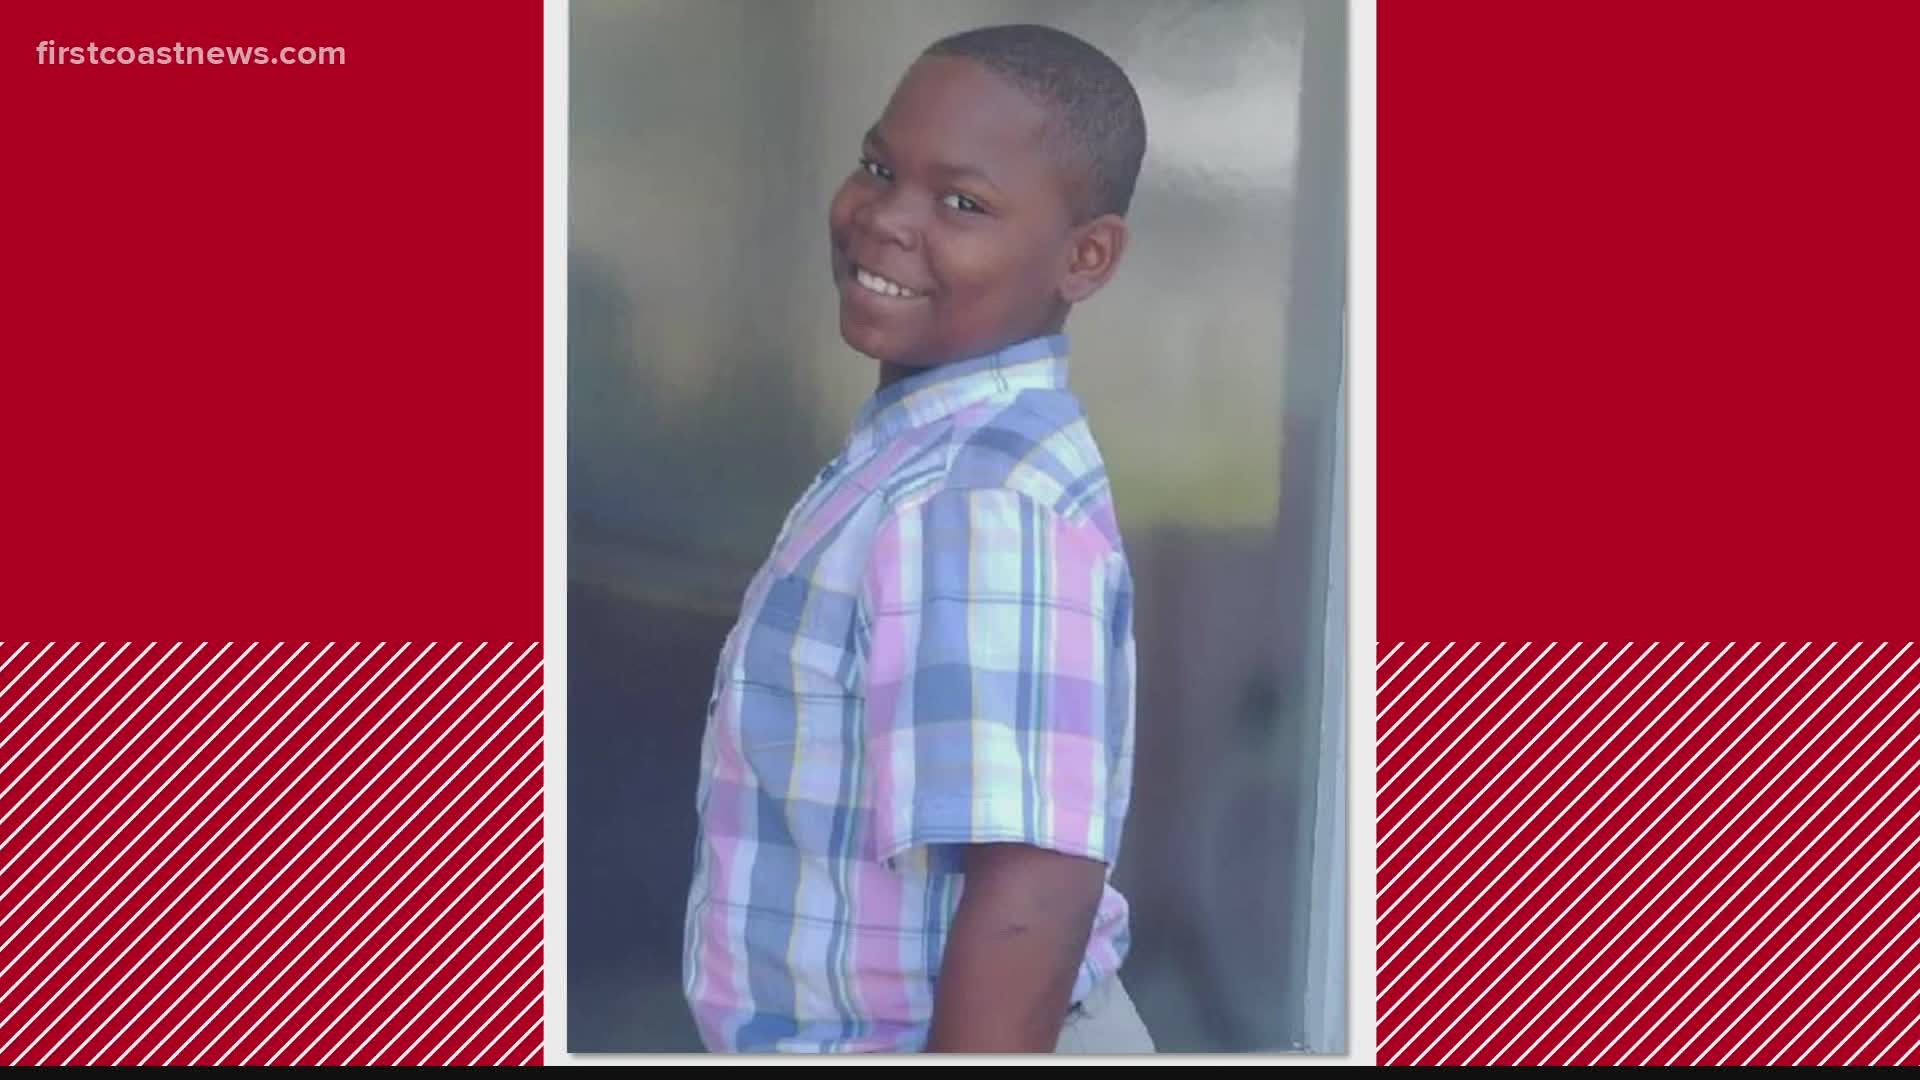 Police said Keavon Washington may be in Jacksonville or Gainesville. He was last seen around 11 p.m. Saturday, May 9.